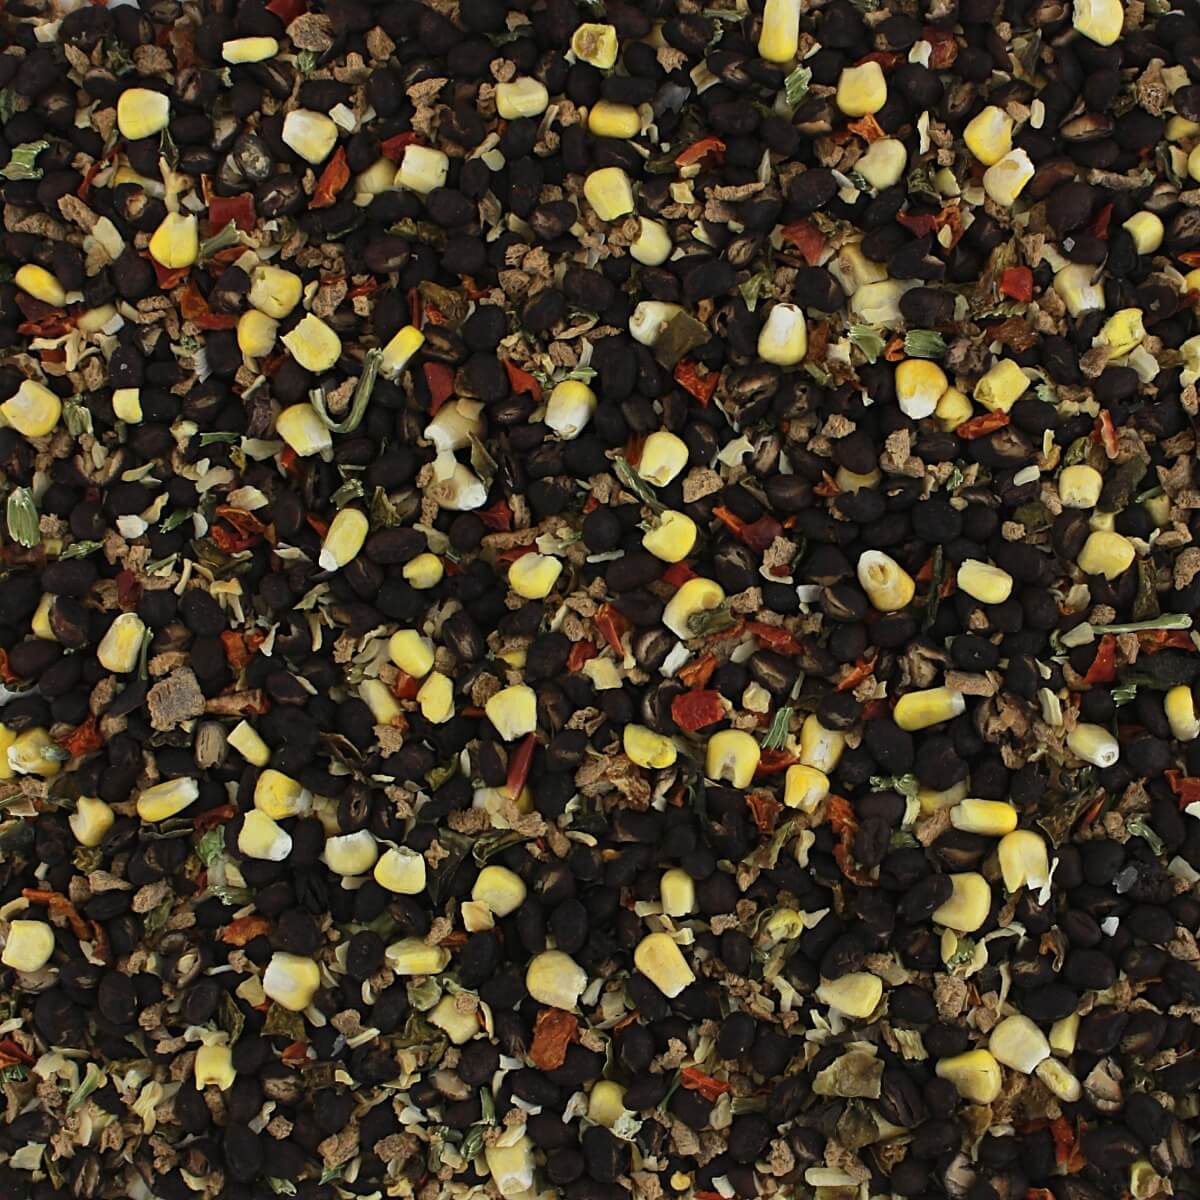 A close up of a pile of black and yellow seeds from Harmony House Soup and Chili Mix Sampler.